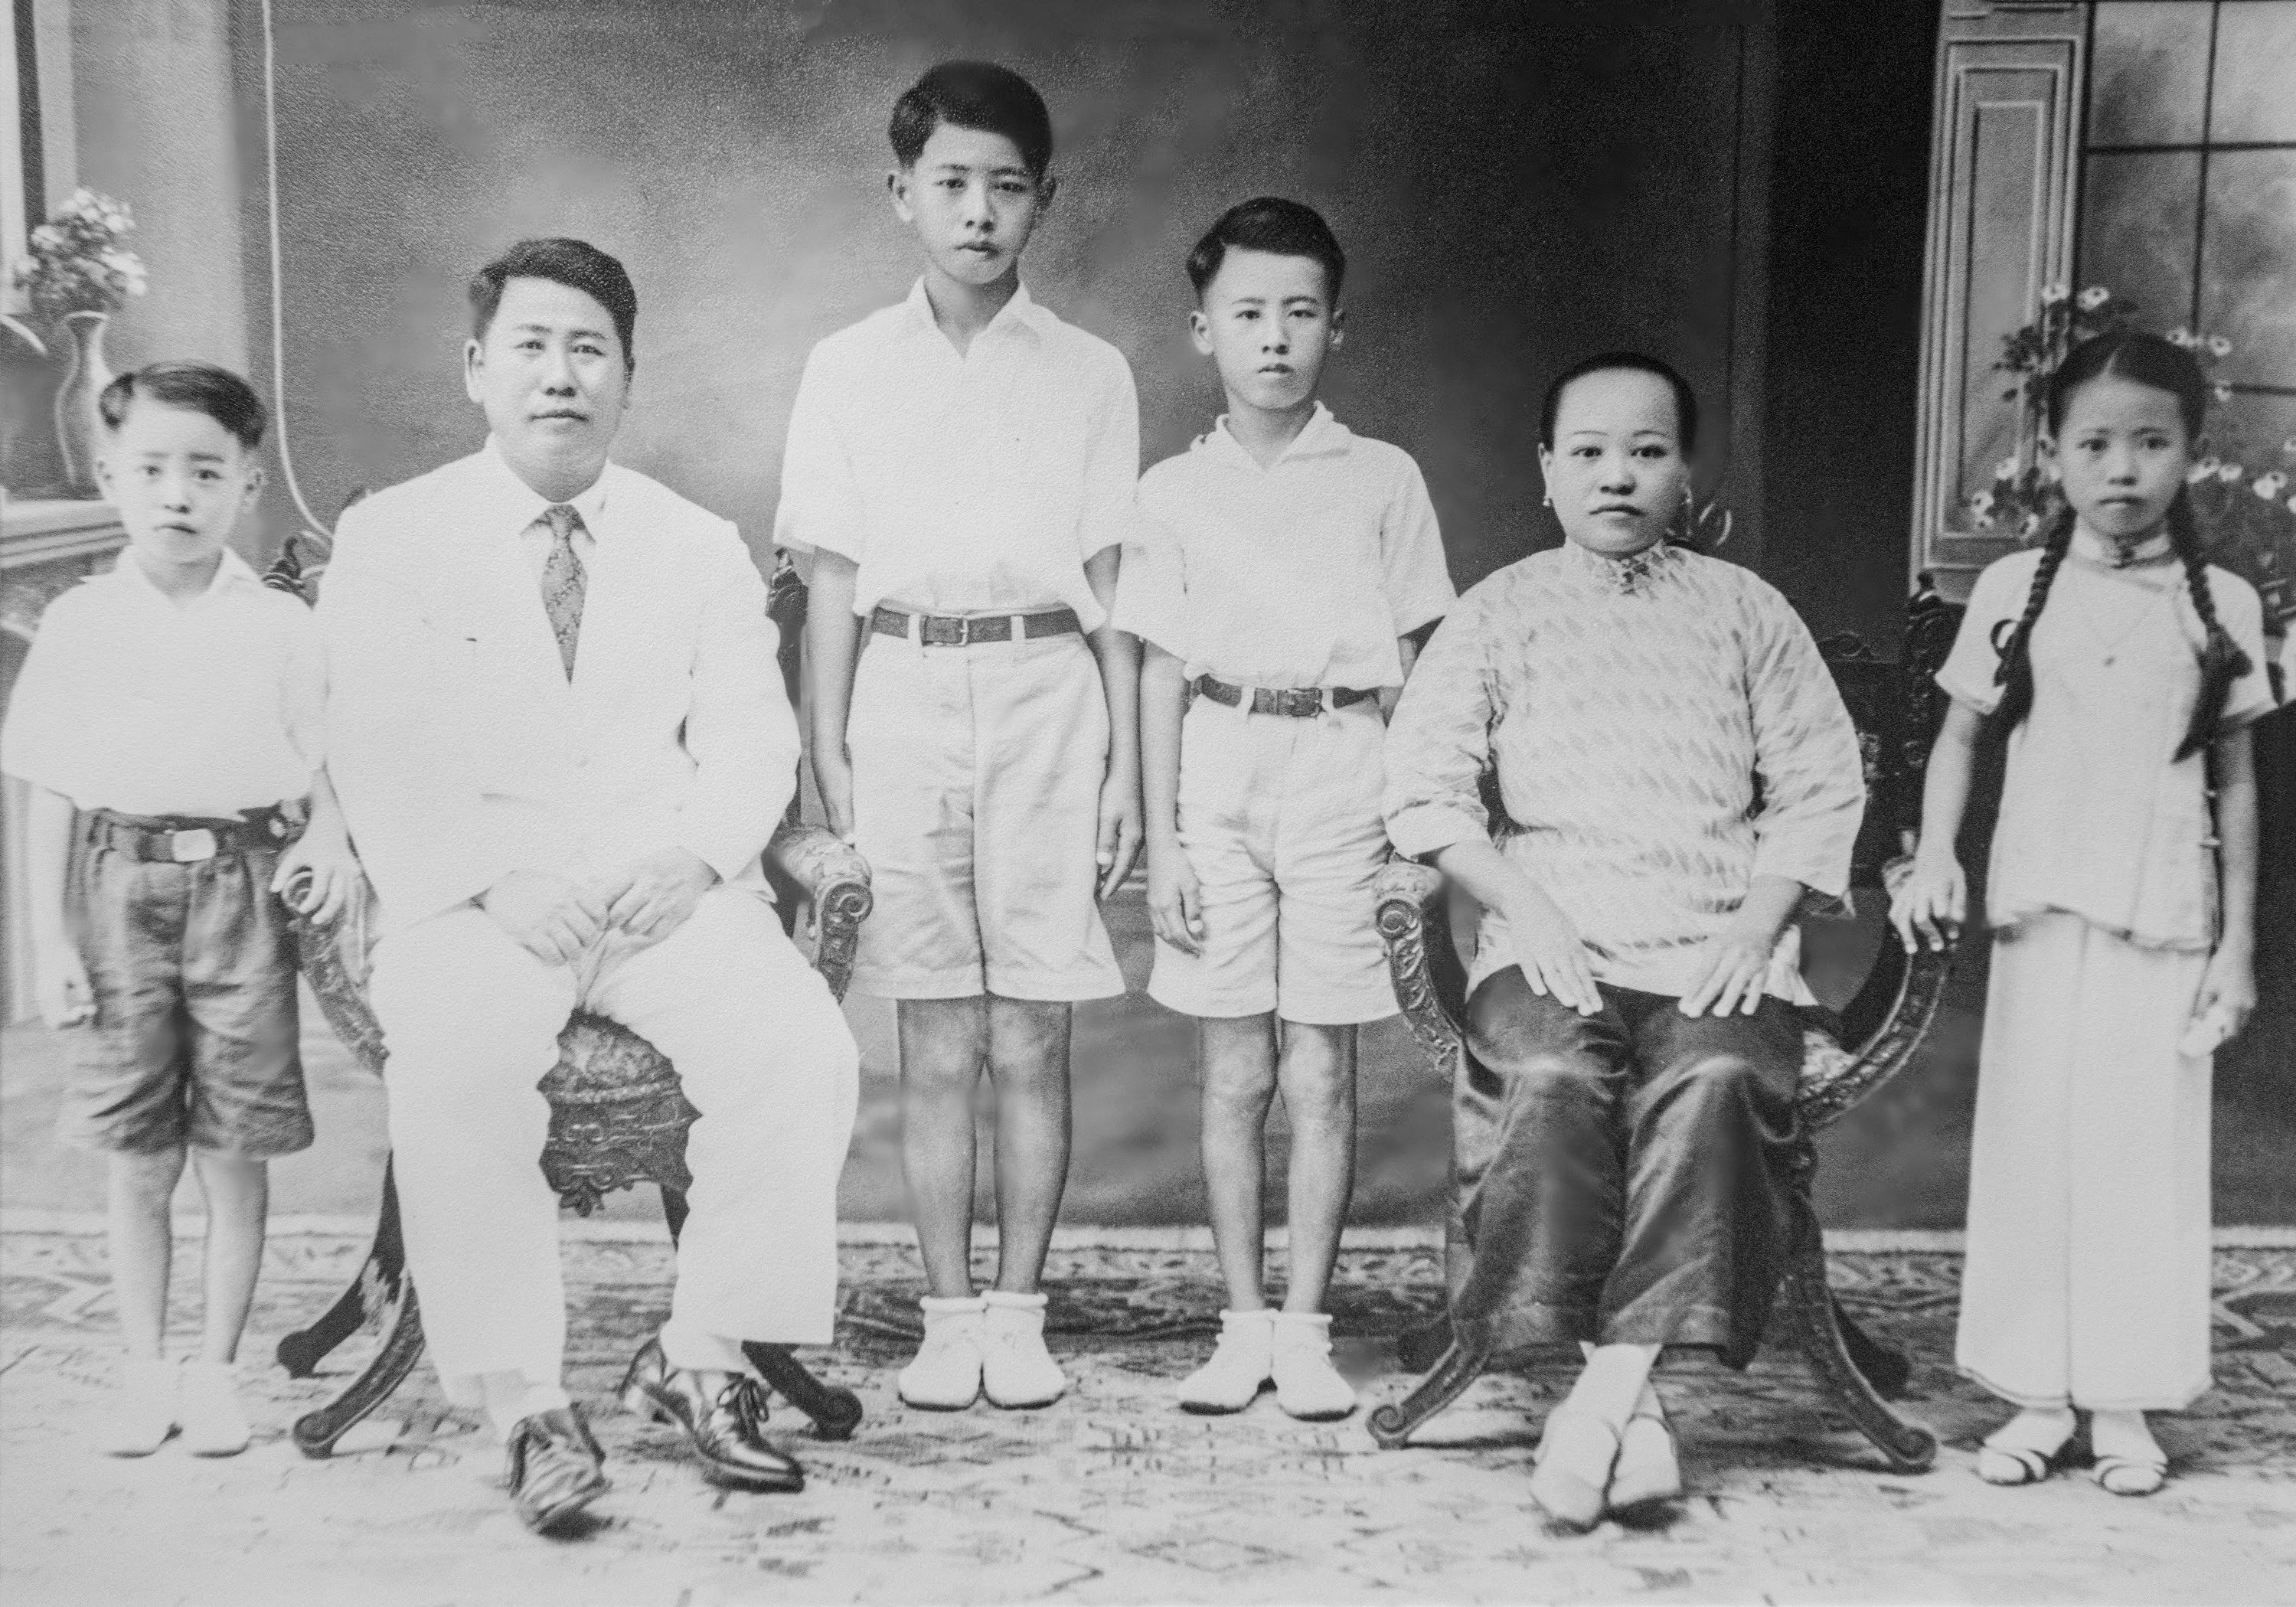 Sophia Yen (far right) as a child with her family